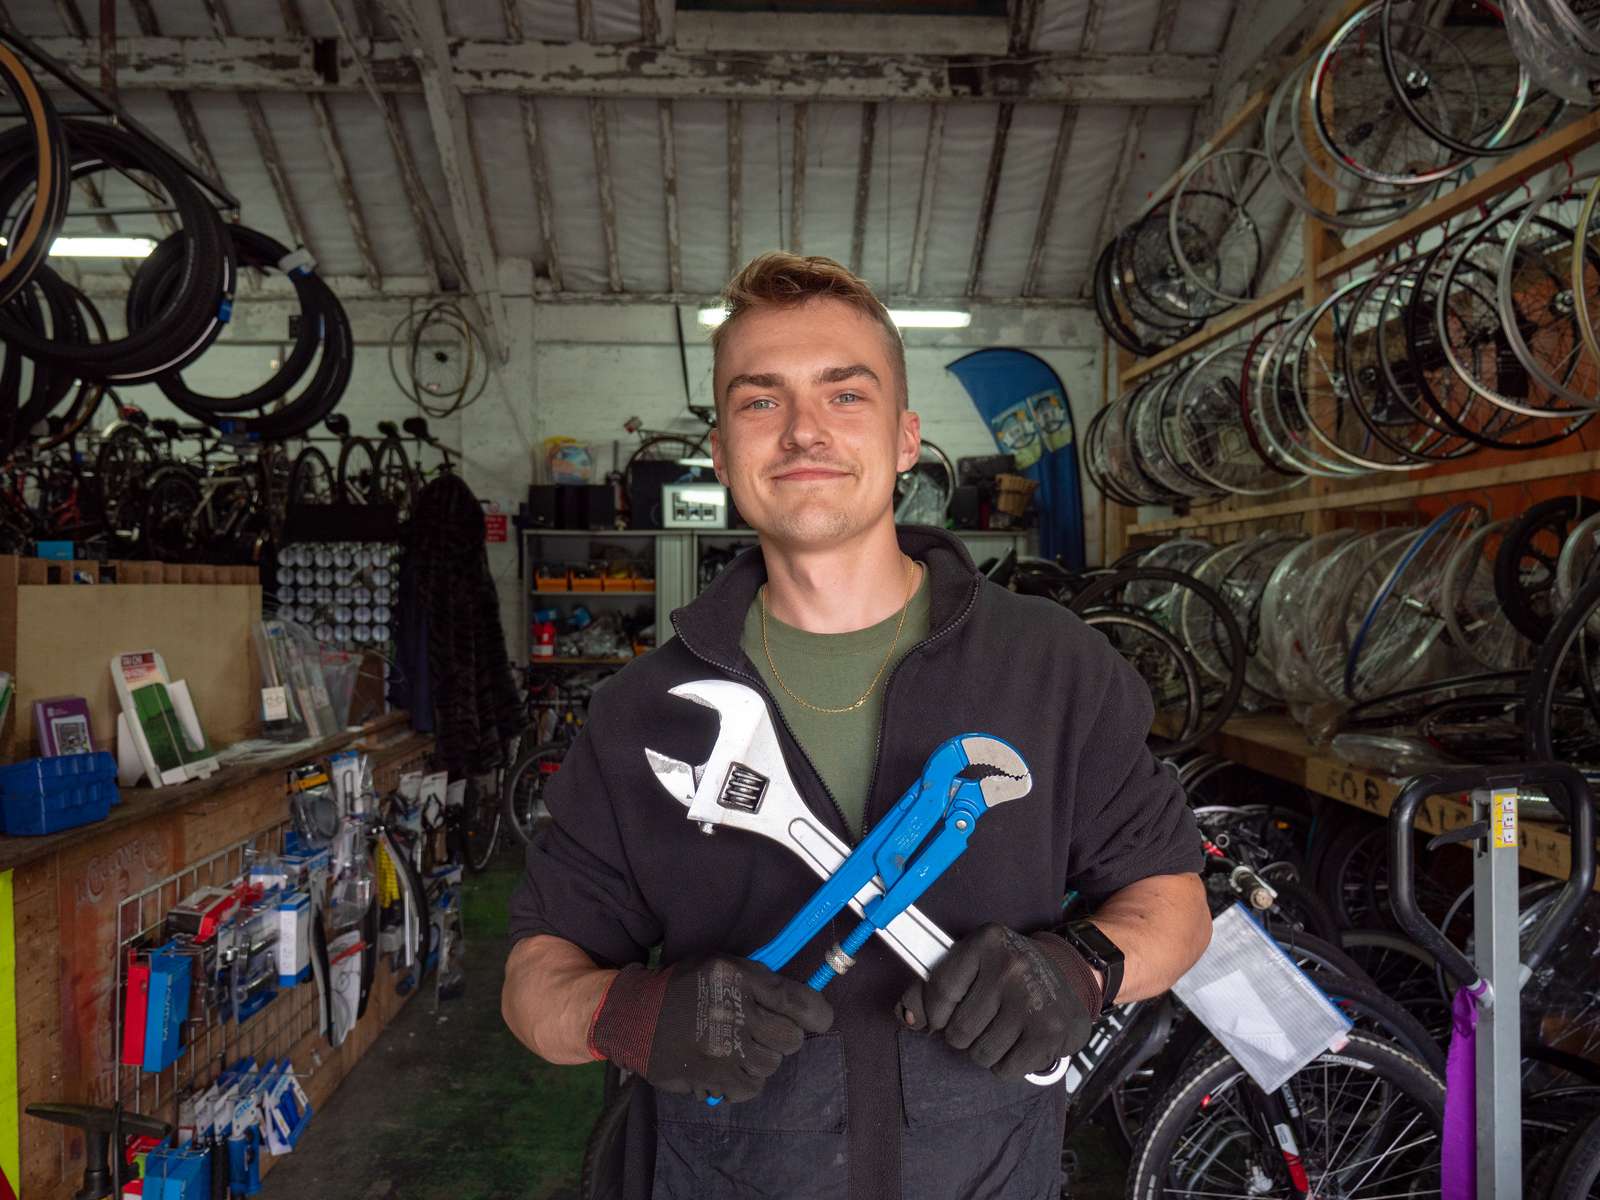 A person holding tools in a bike workshop